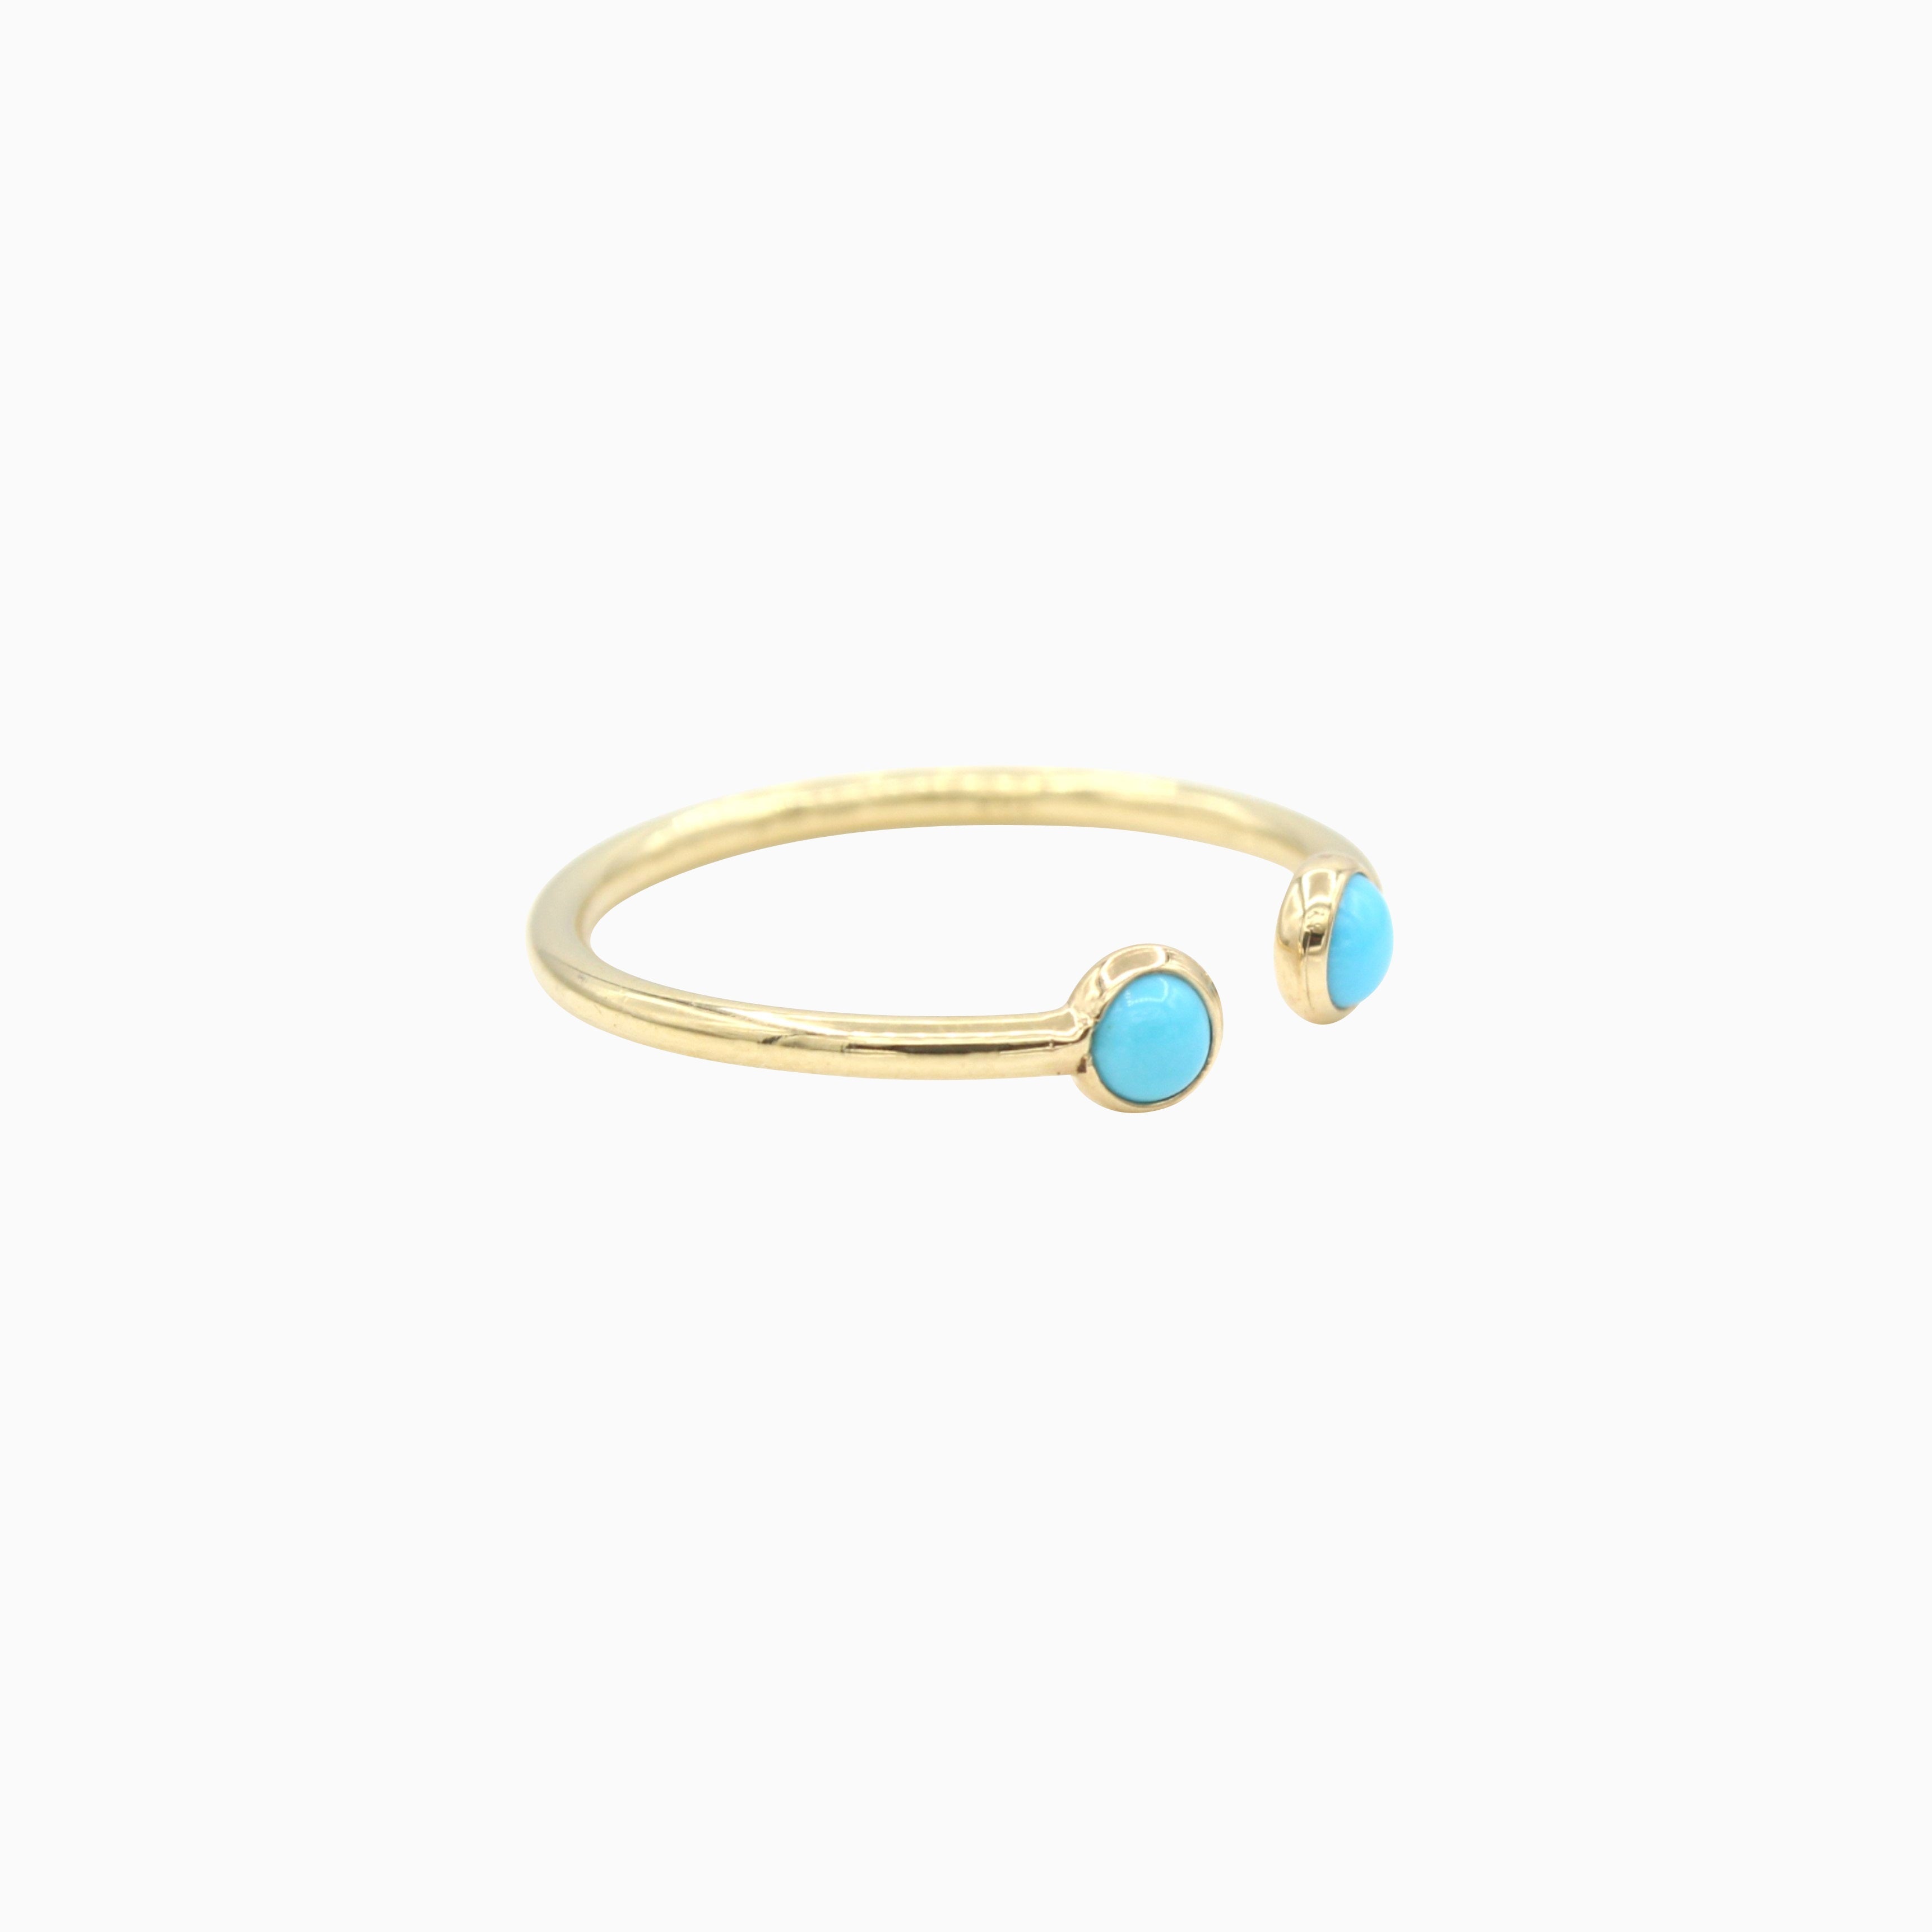 14k Yellow Gold Cabochon Turquoise Open Ring, side view from left